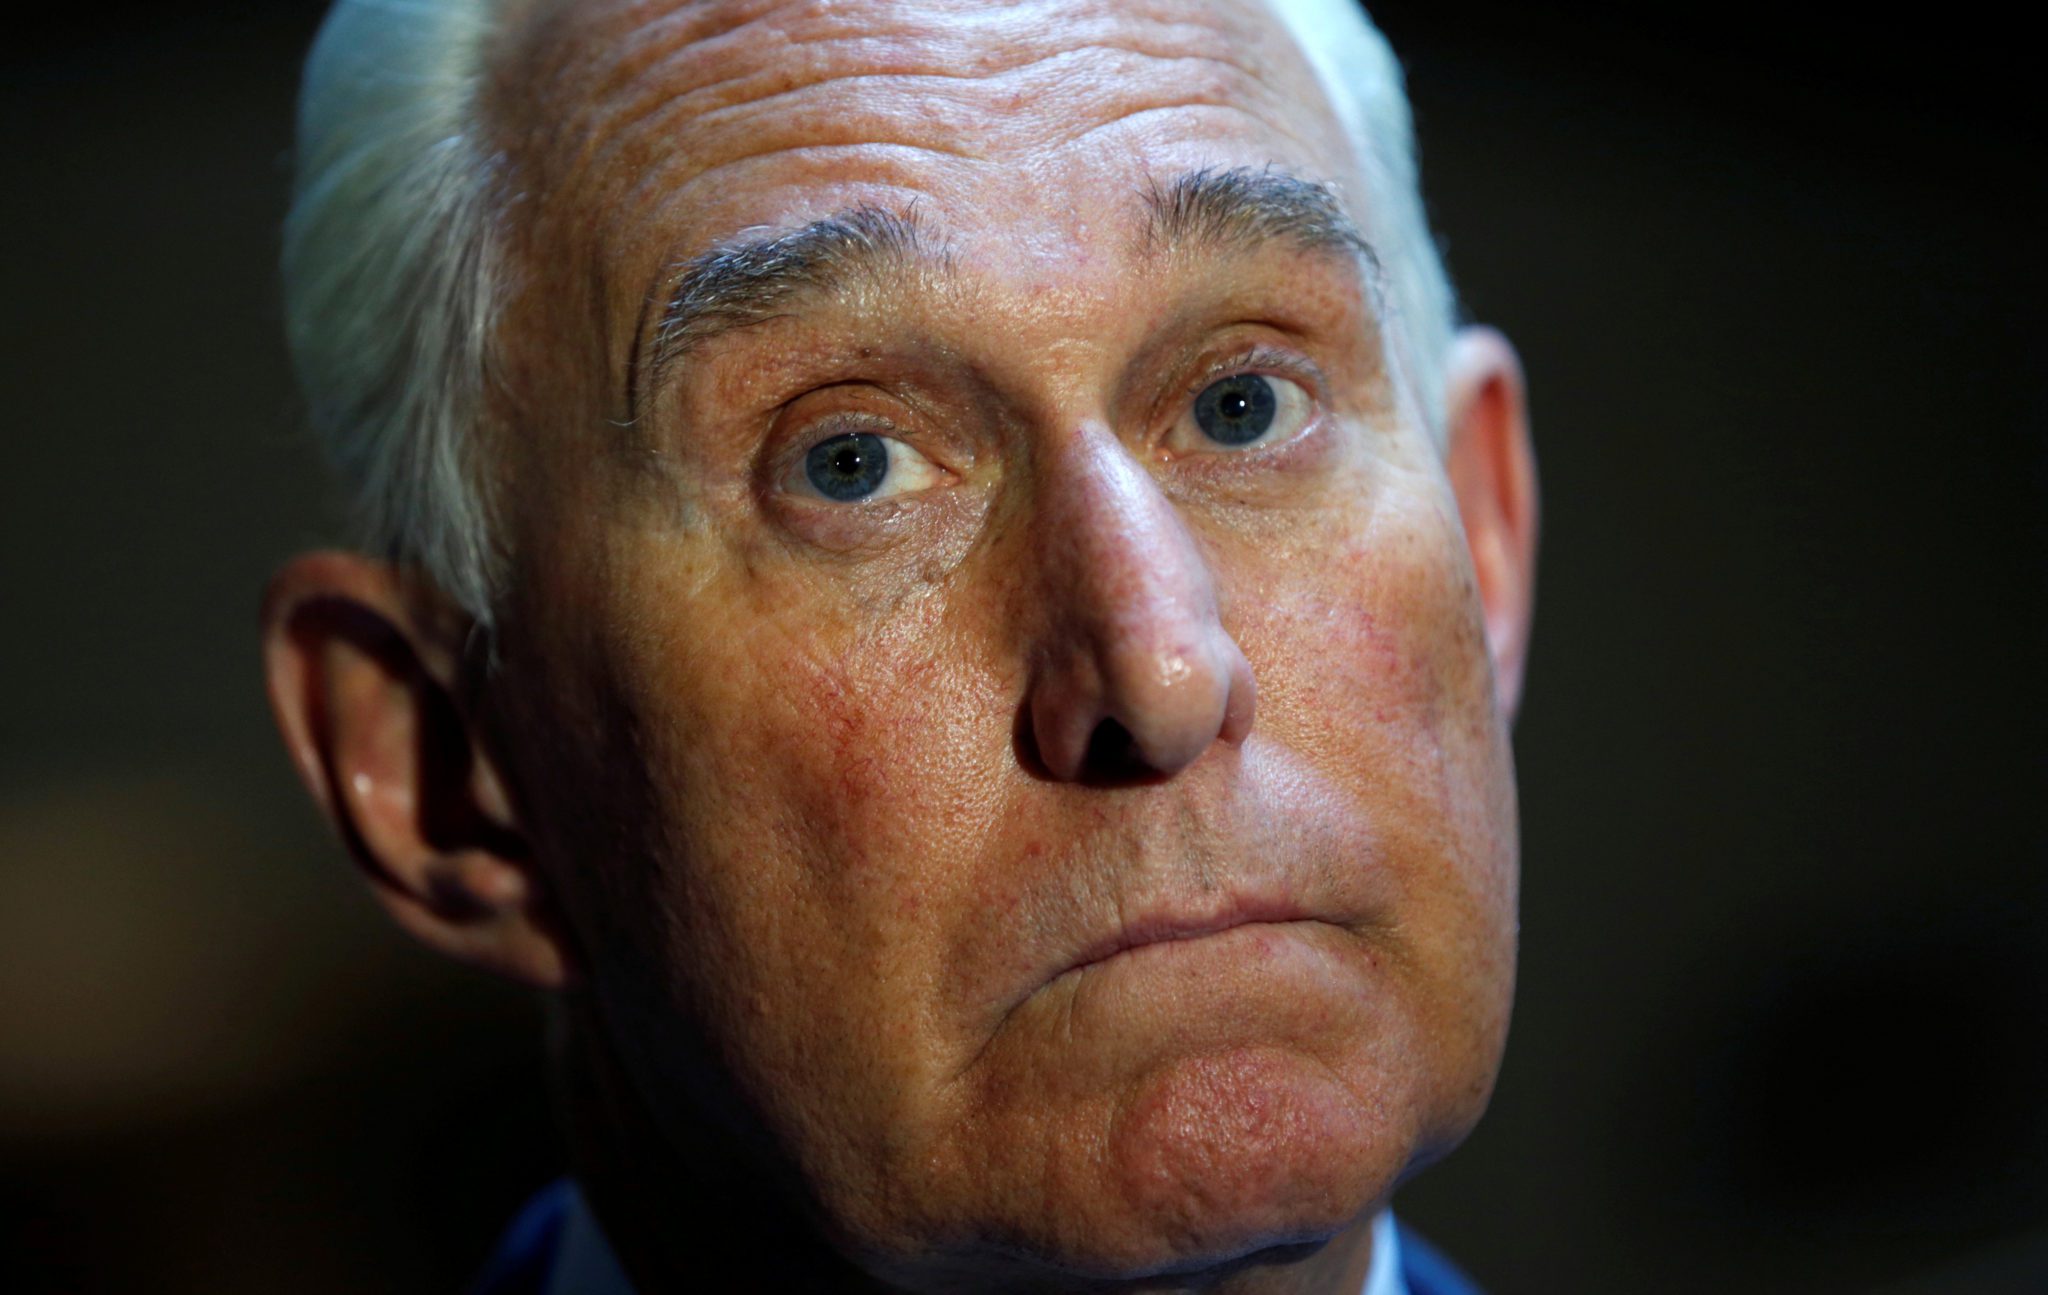 Roger Stone Seems To Be Getting Ready For Jail By Claiming Alex Jones Lawyer Set Him Up